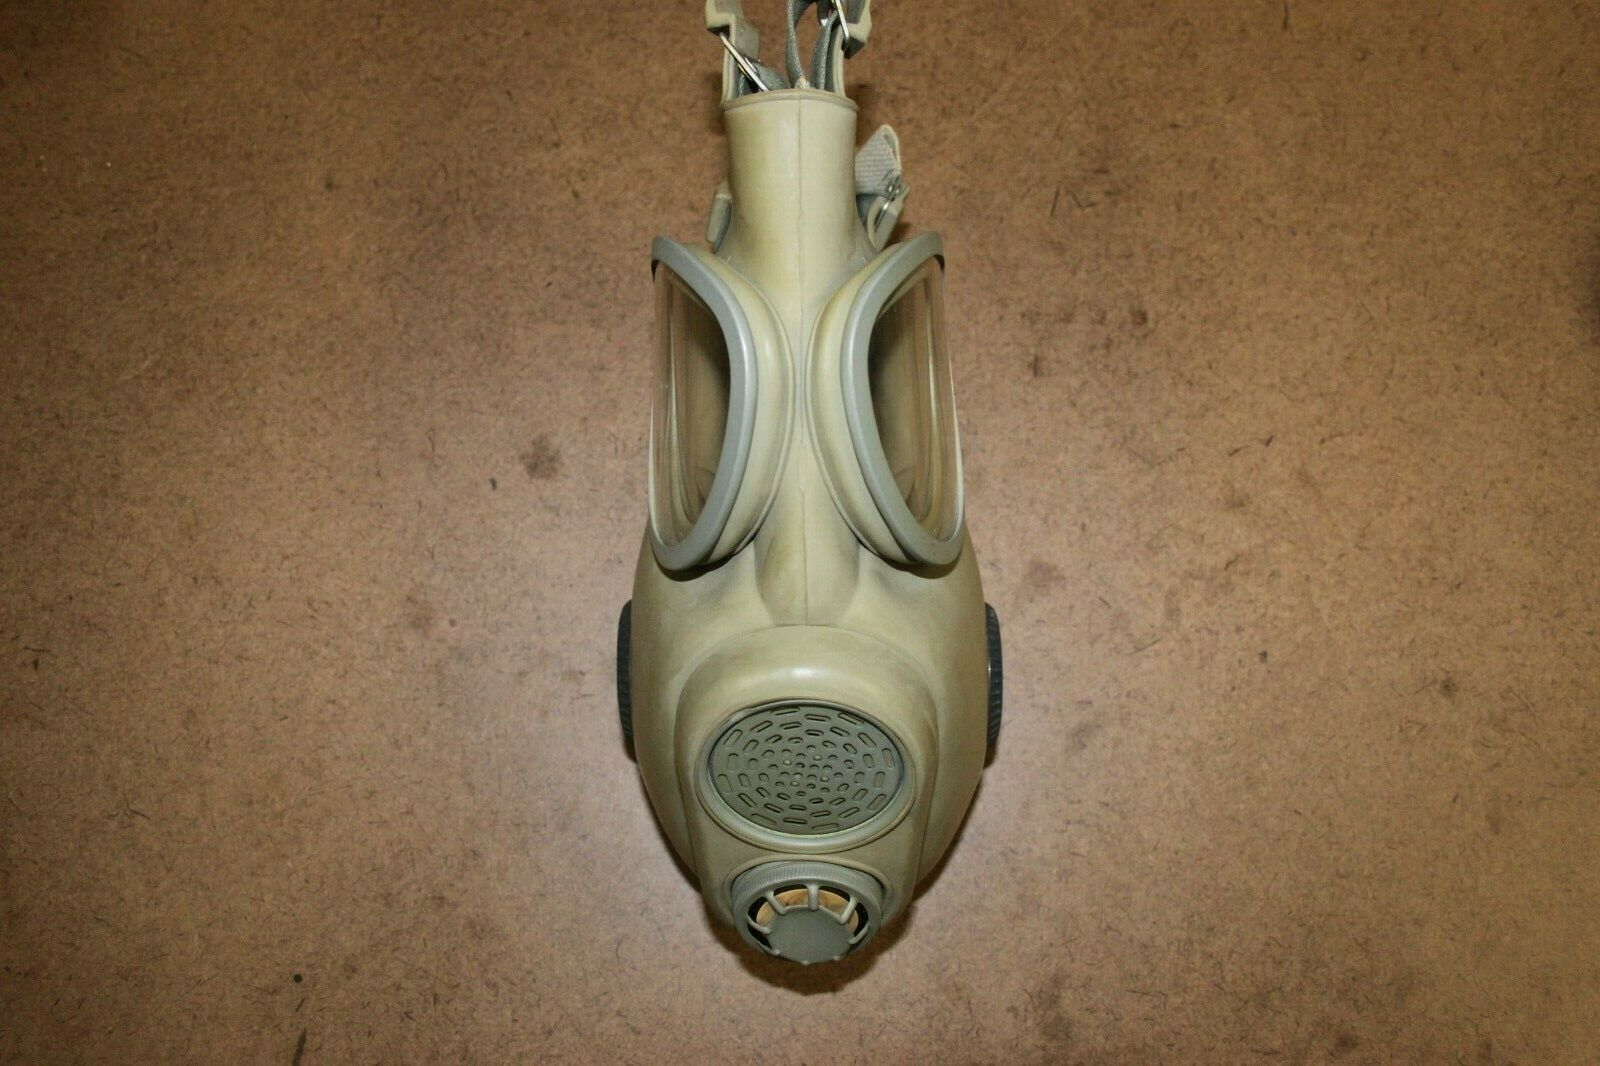 FADED/DISCOLORED USED CZECH M10 GAS MASK WITH INLETS AND FILTERS LOTZ5